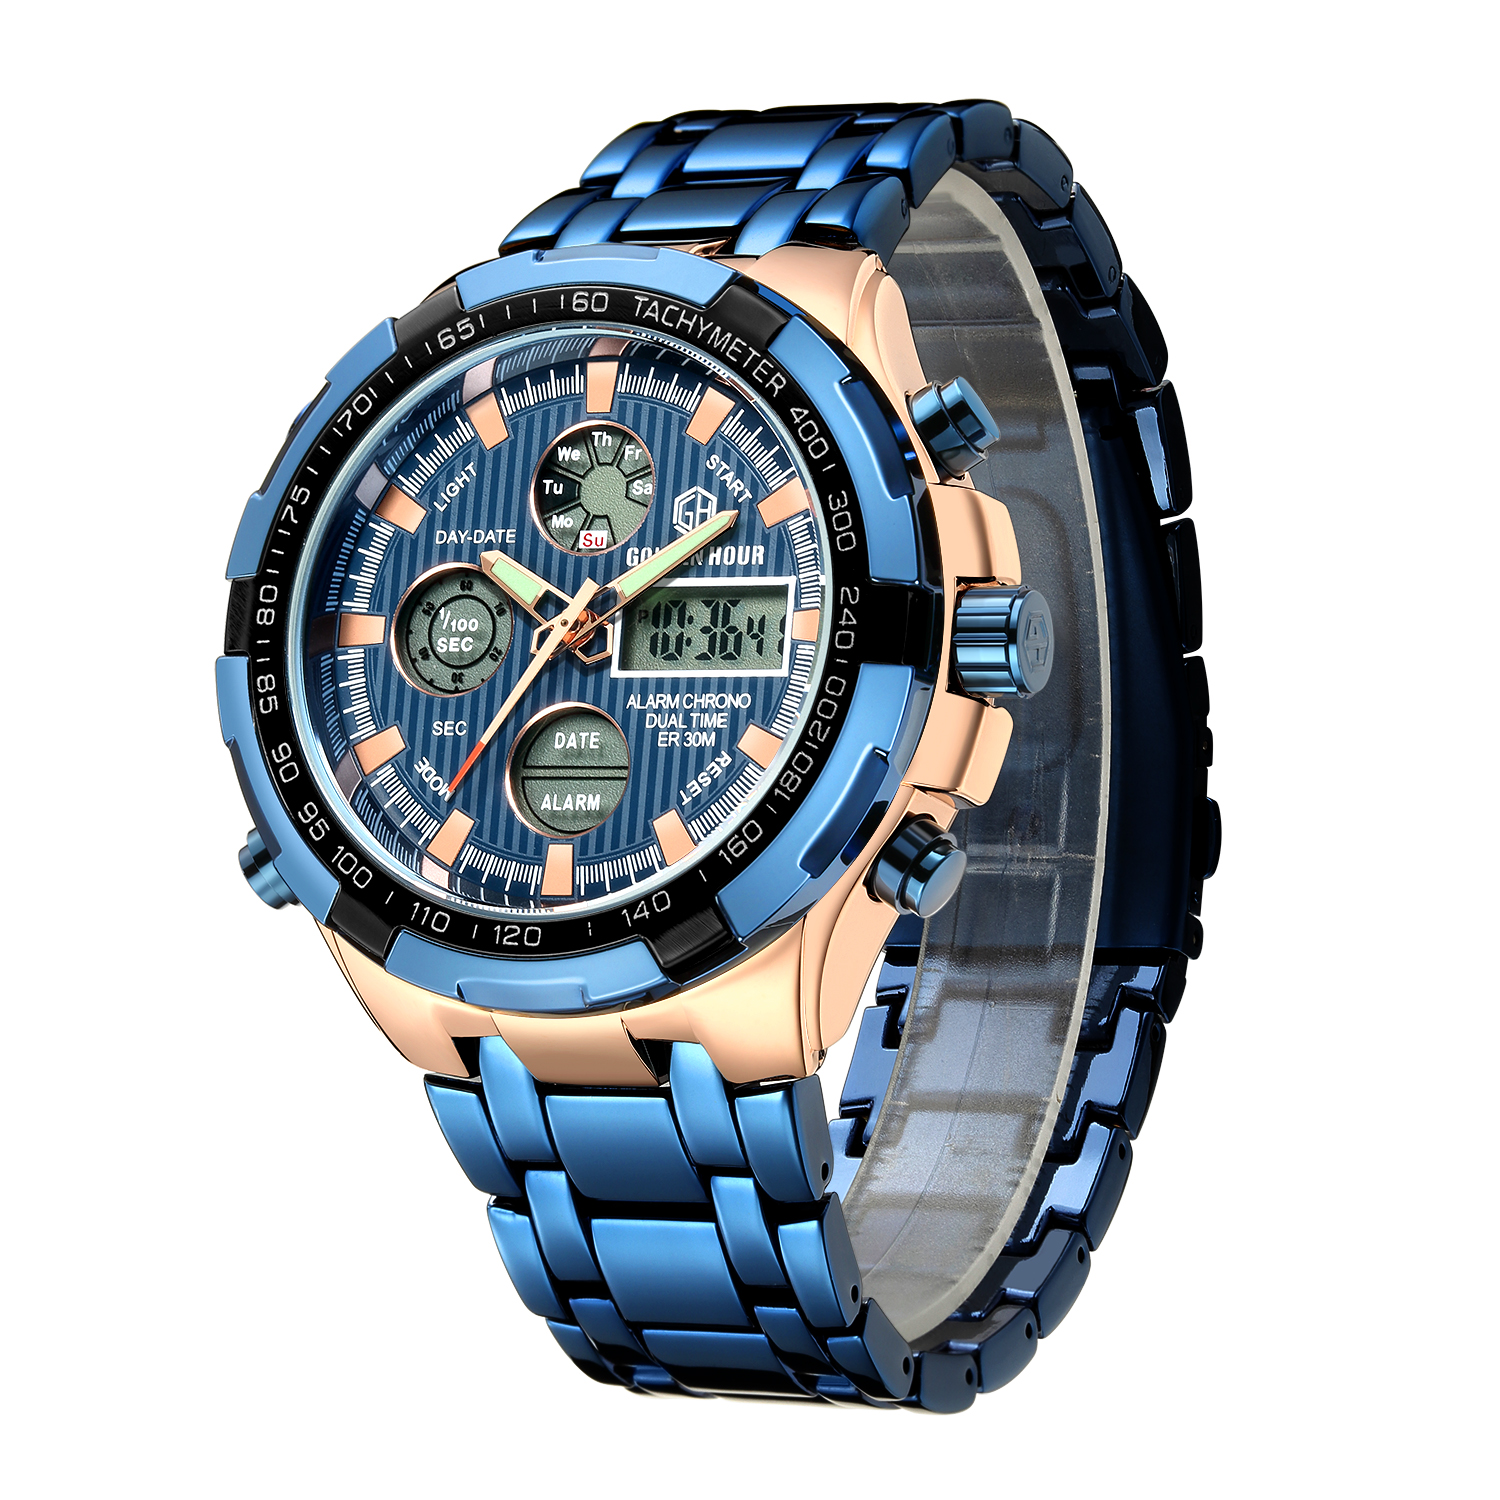 GOLDEN HOUR GH-108-RG-BE Mens Stainless Steel Digital Analog Watches